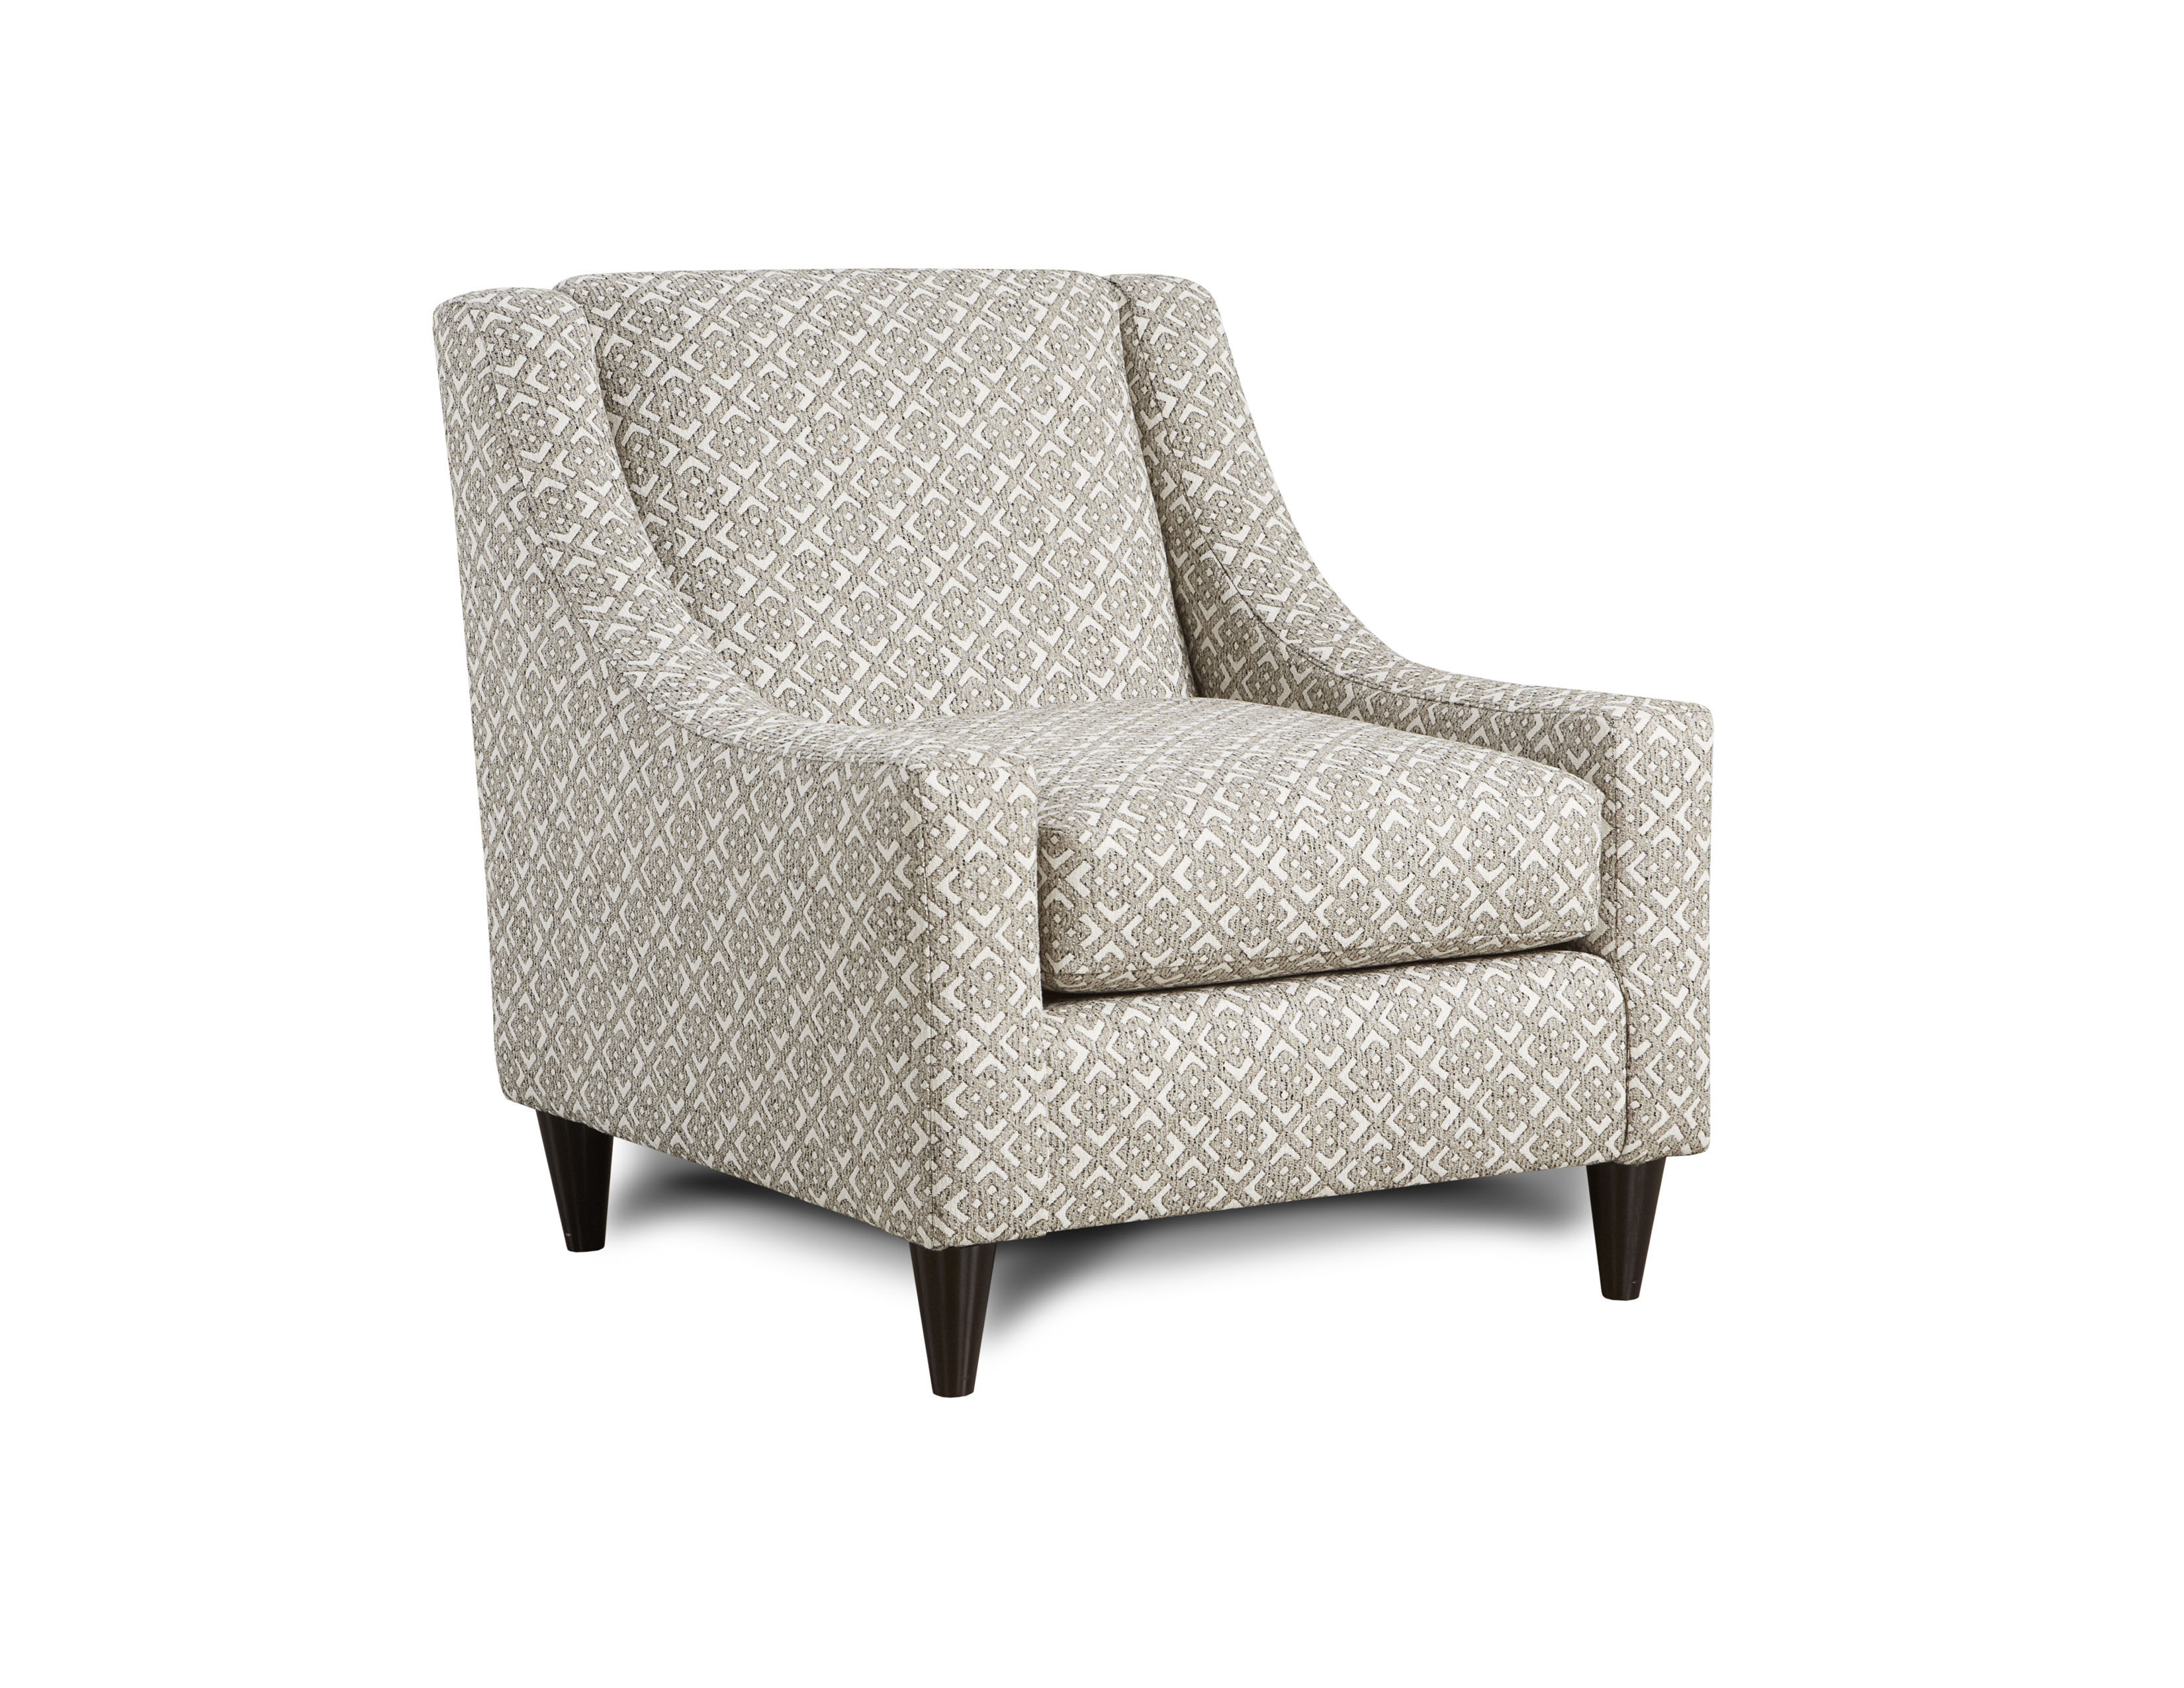 Macedonia Berber Fusion Furniture chair, Evenings Stone collection